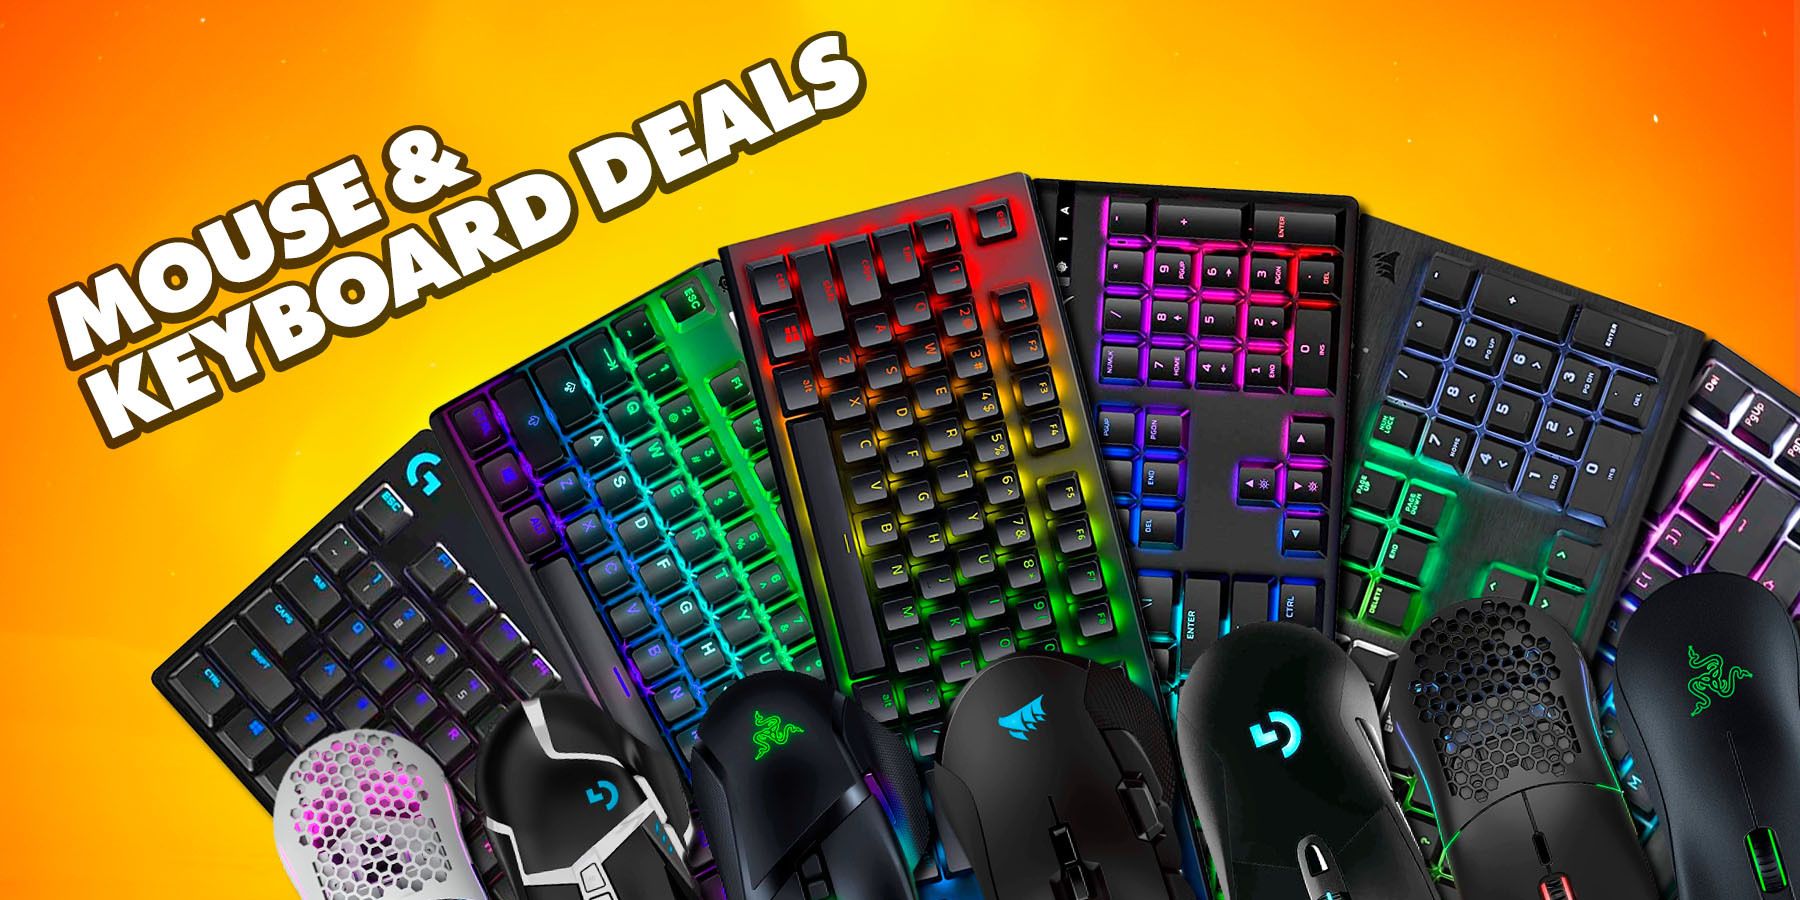 The Best Prime Day Mouse and Keyboard Deals text